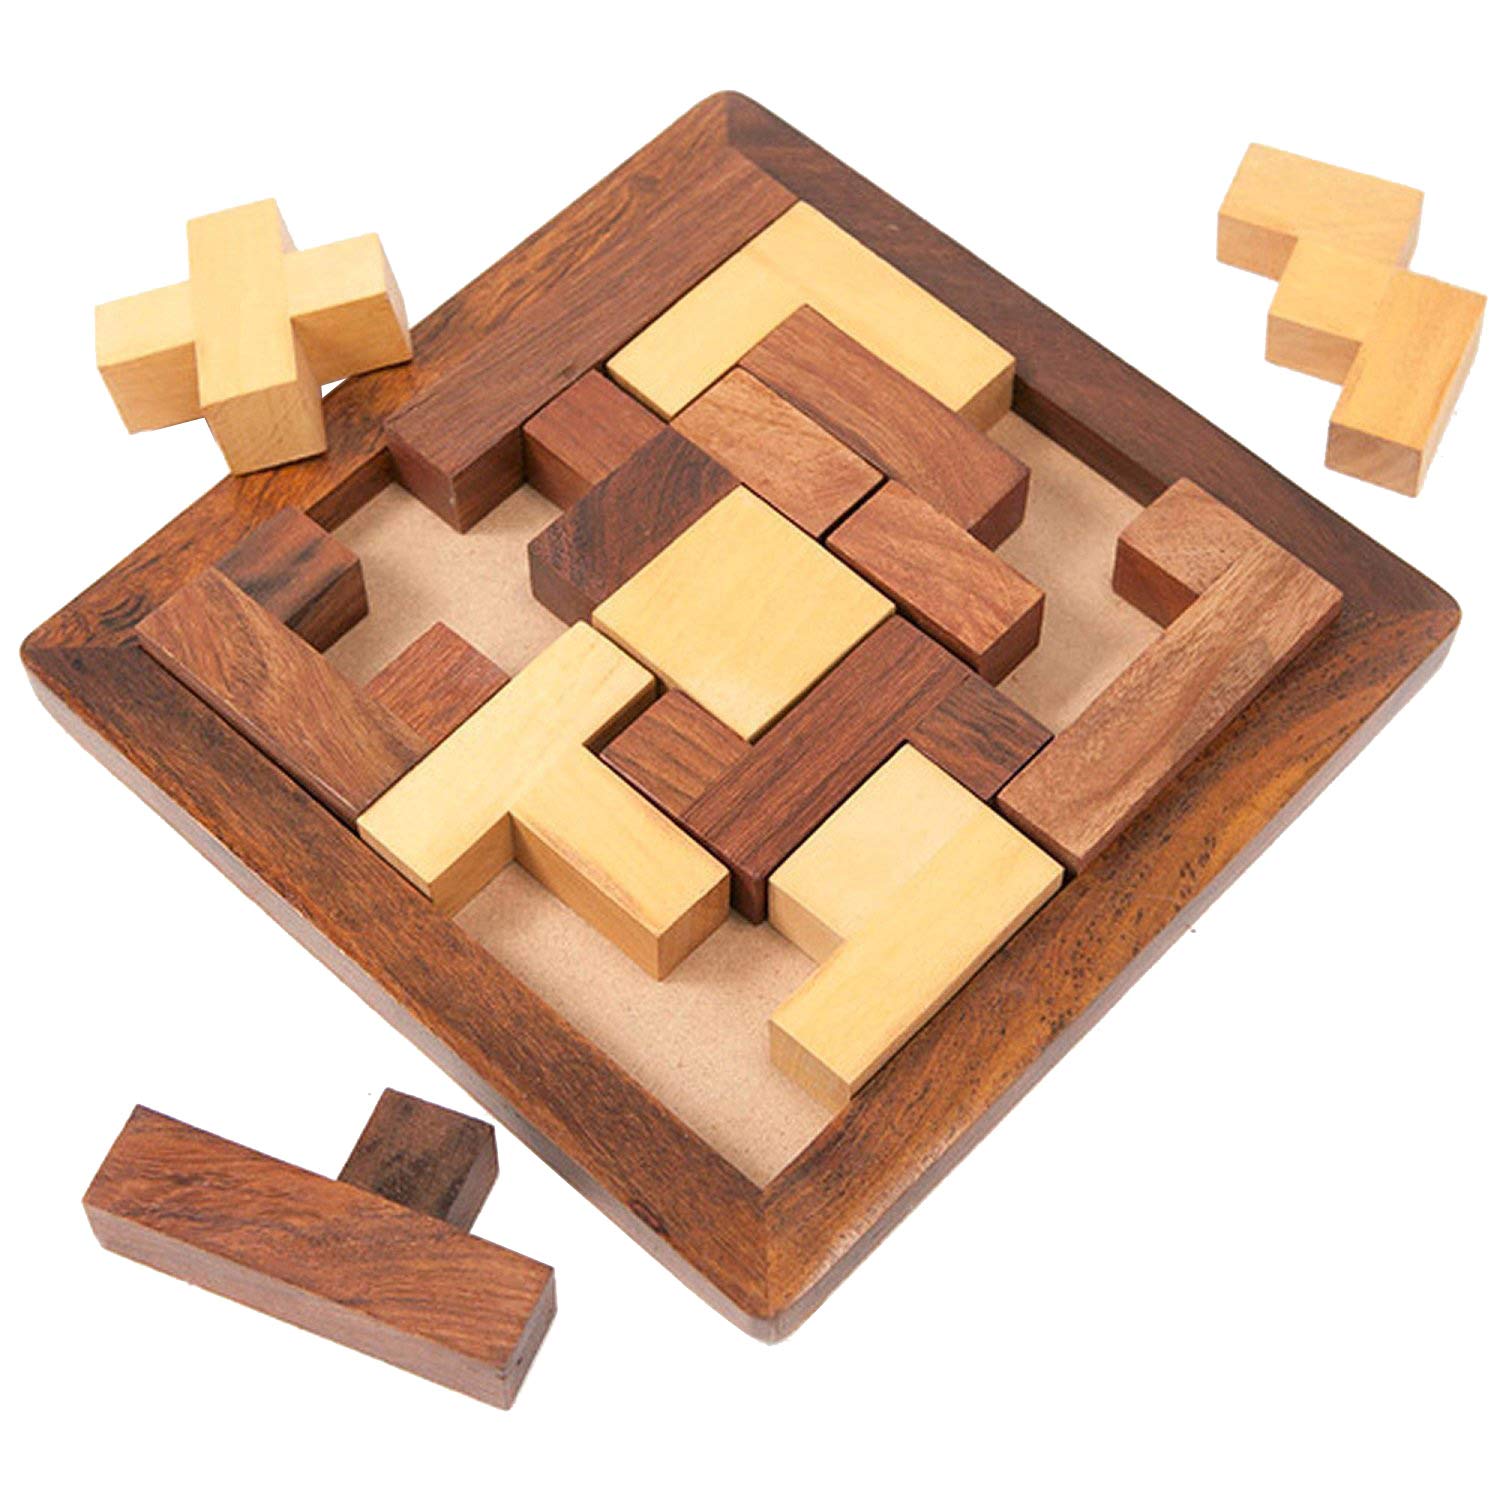 Craftland Wooden Jigsaw Puzzle - Wooden Toys/Games for Kids - Travel Games for Families - Unique Gifts for Children- Indoor Outdoor Board Games